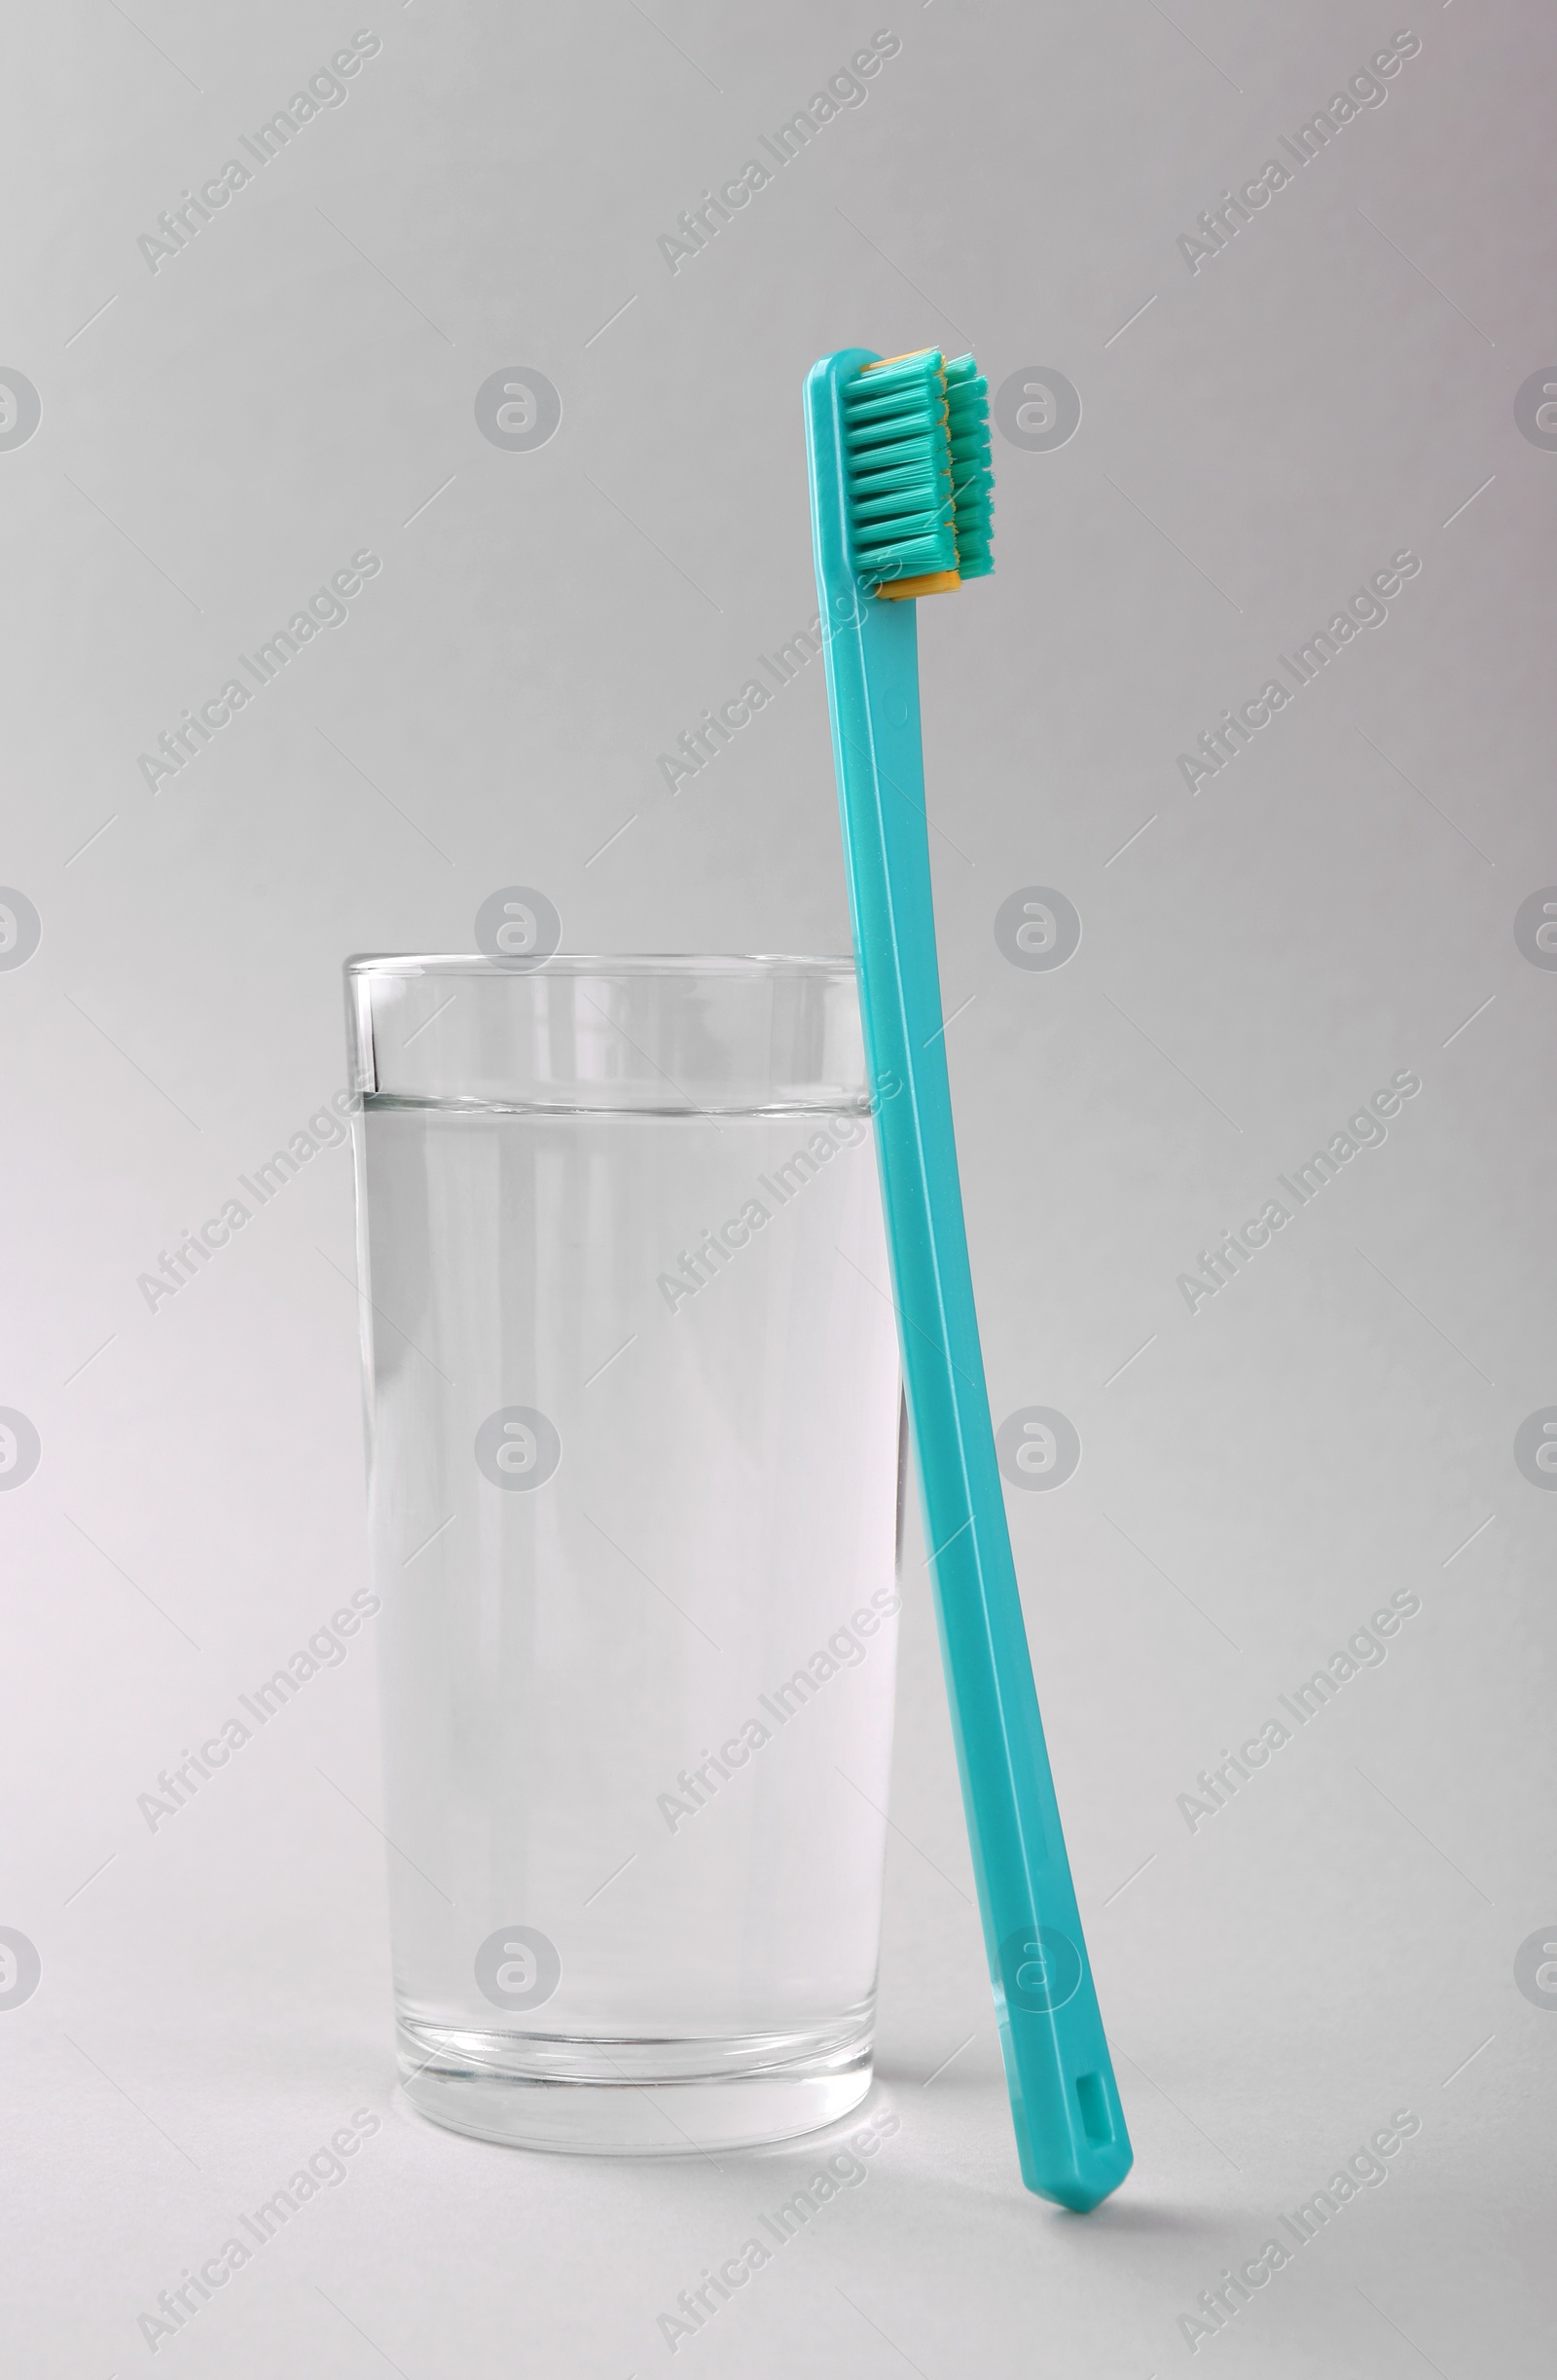 Photo of Plastic toothbrush and glass of water on light background